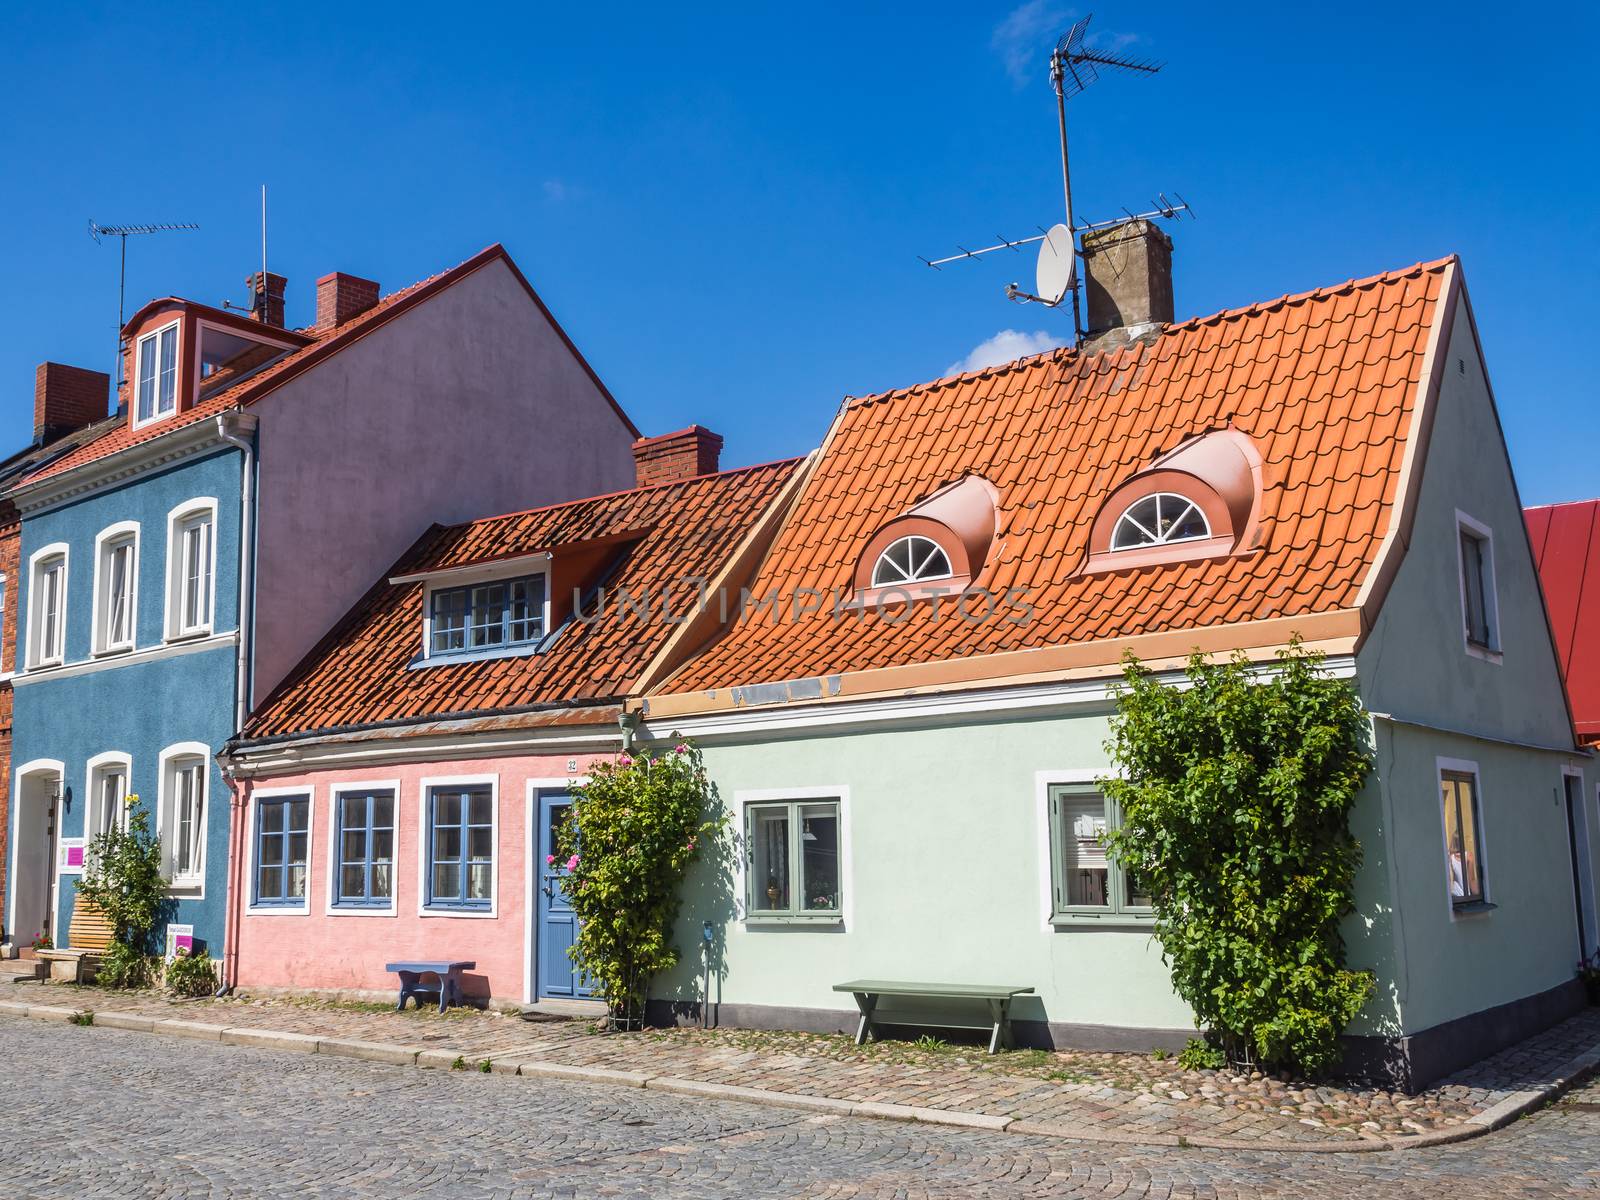 Cityscape of Ystad. City founded in 11th century is a busy ferry port and the place of action of well-known novels by Henning Mankell with detective Wallander.